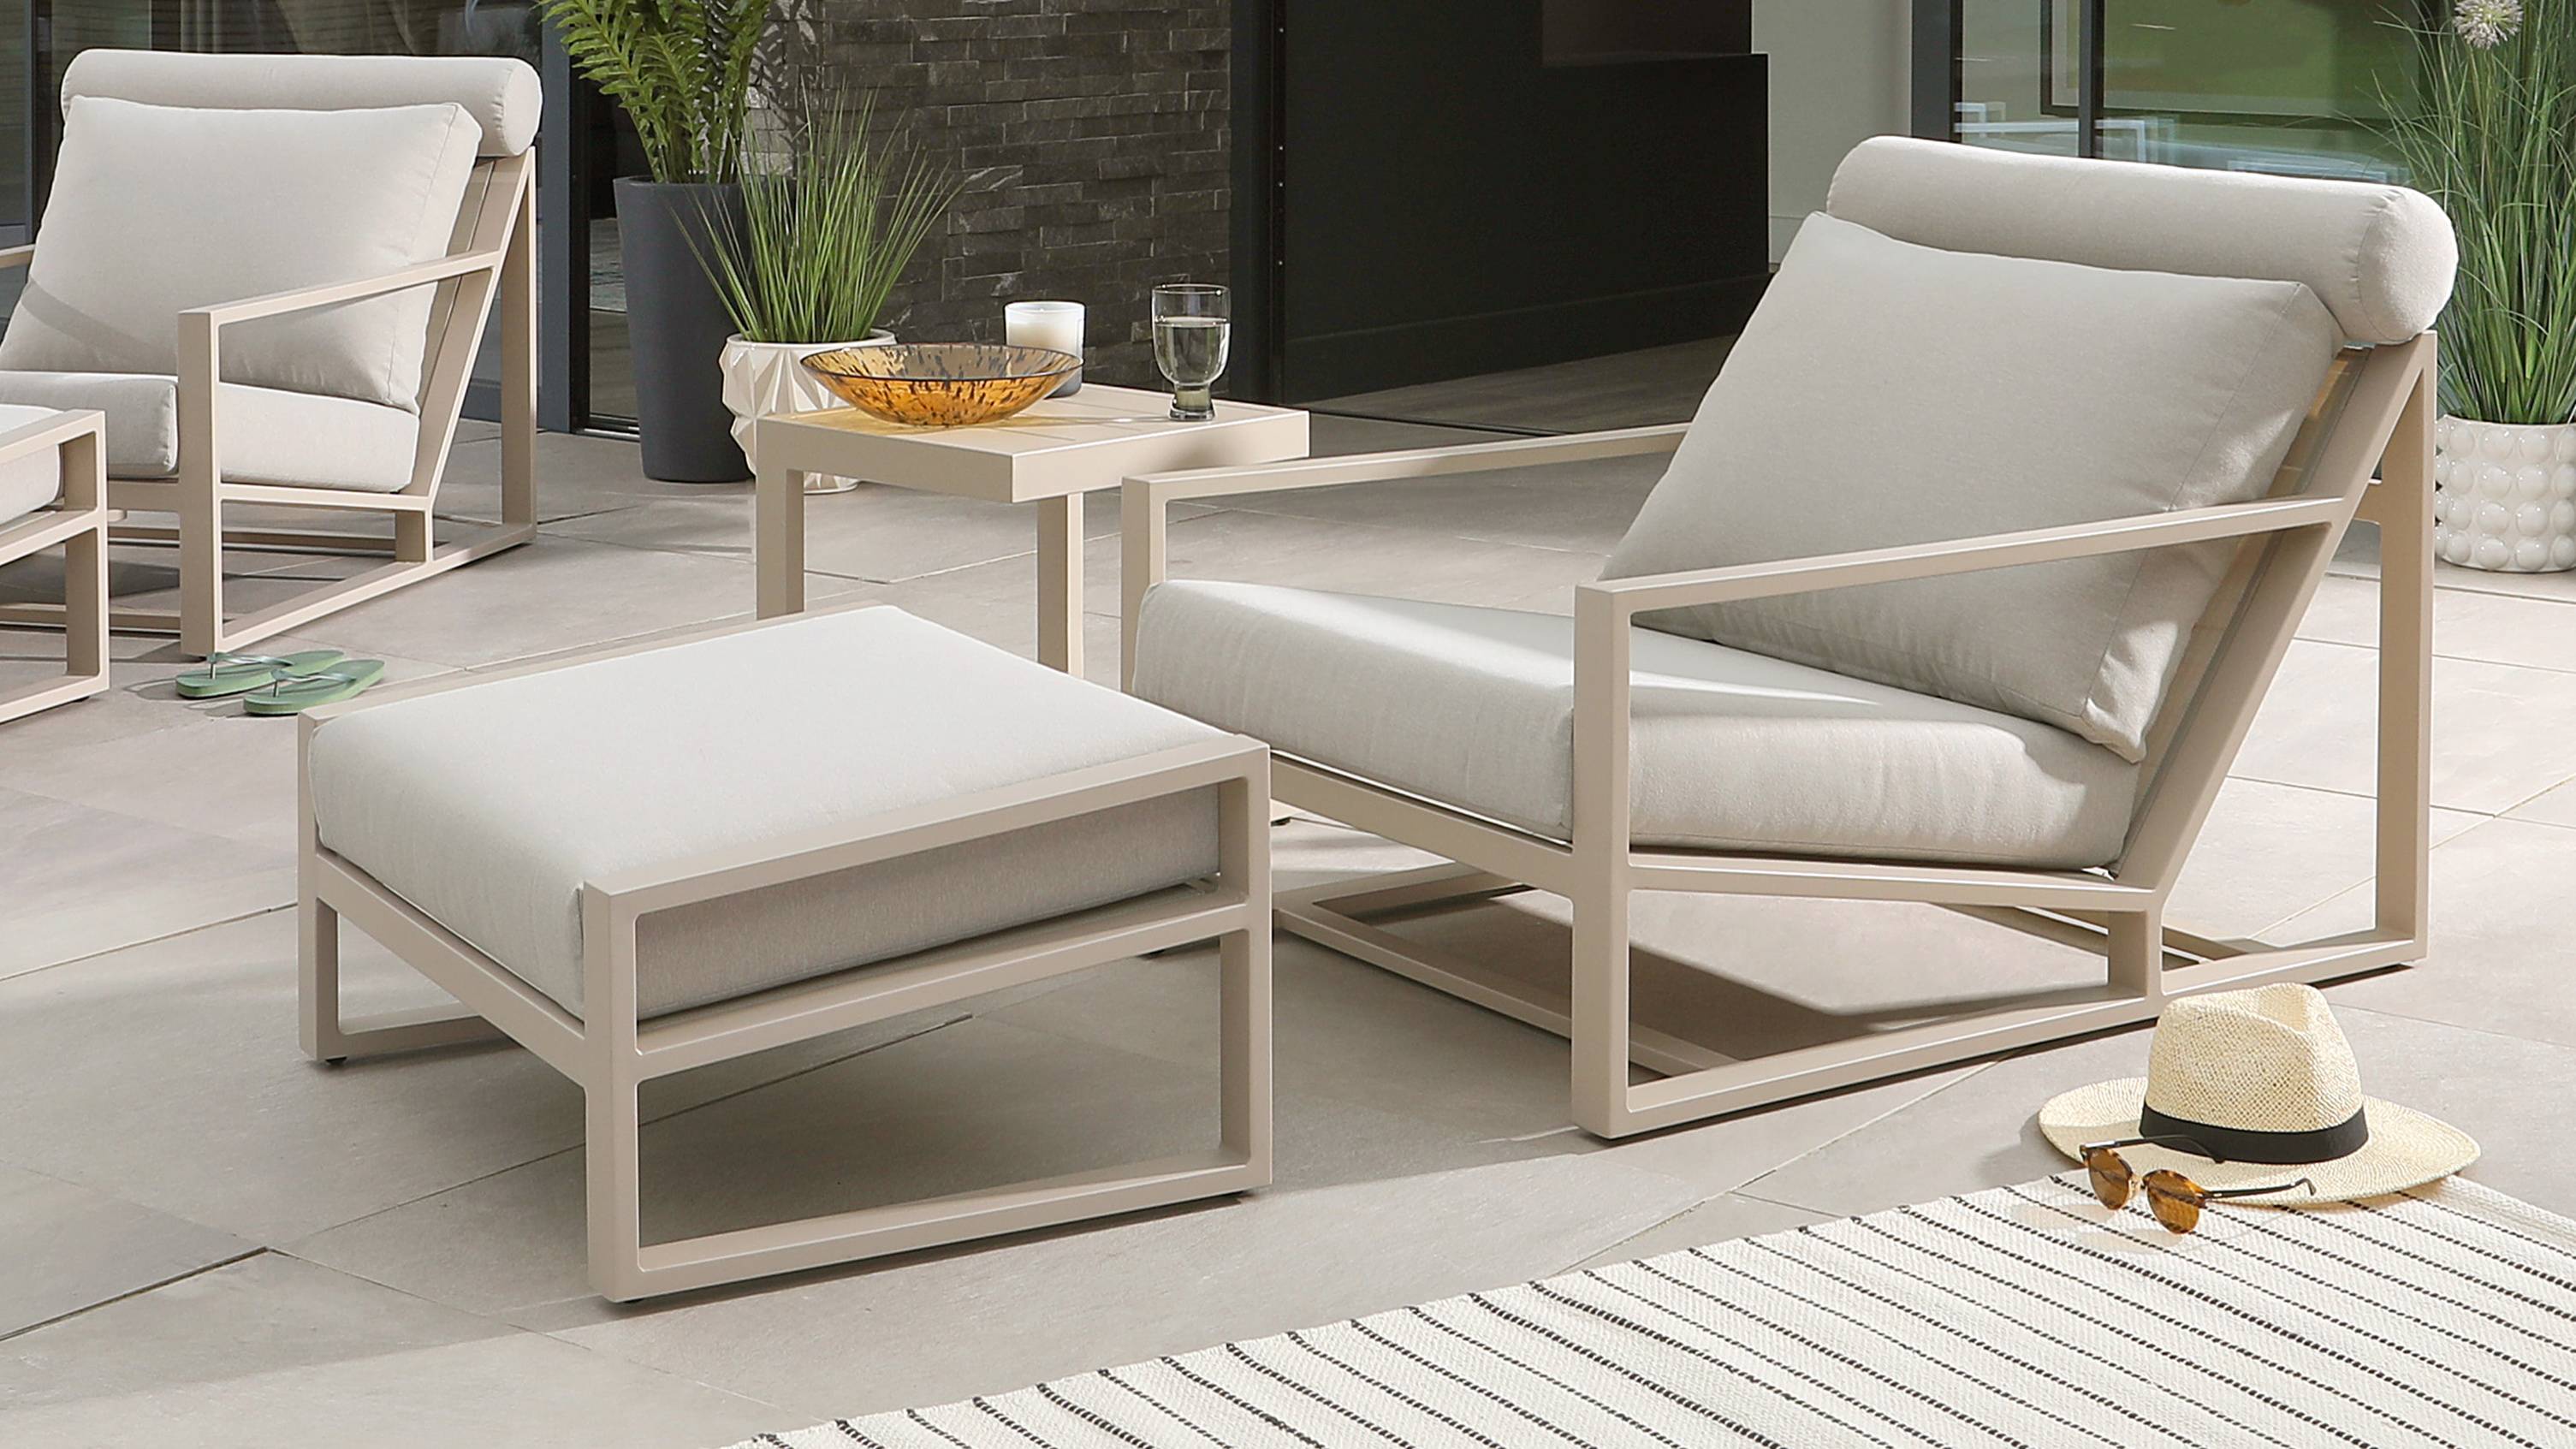 Verano Natural Garden Lounge Chair and Footstool